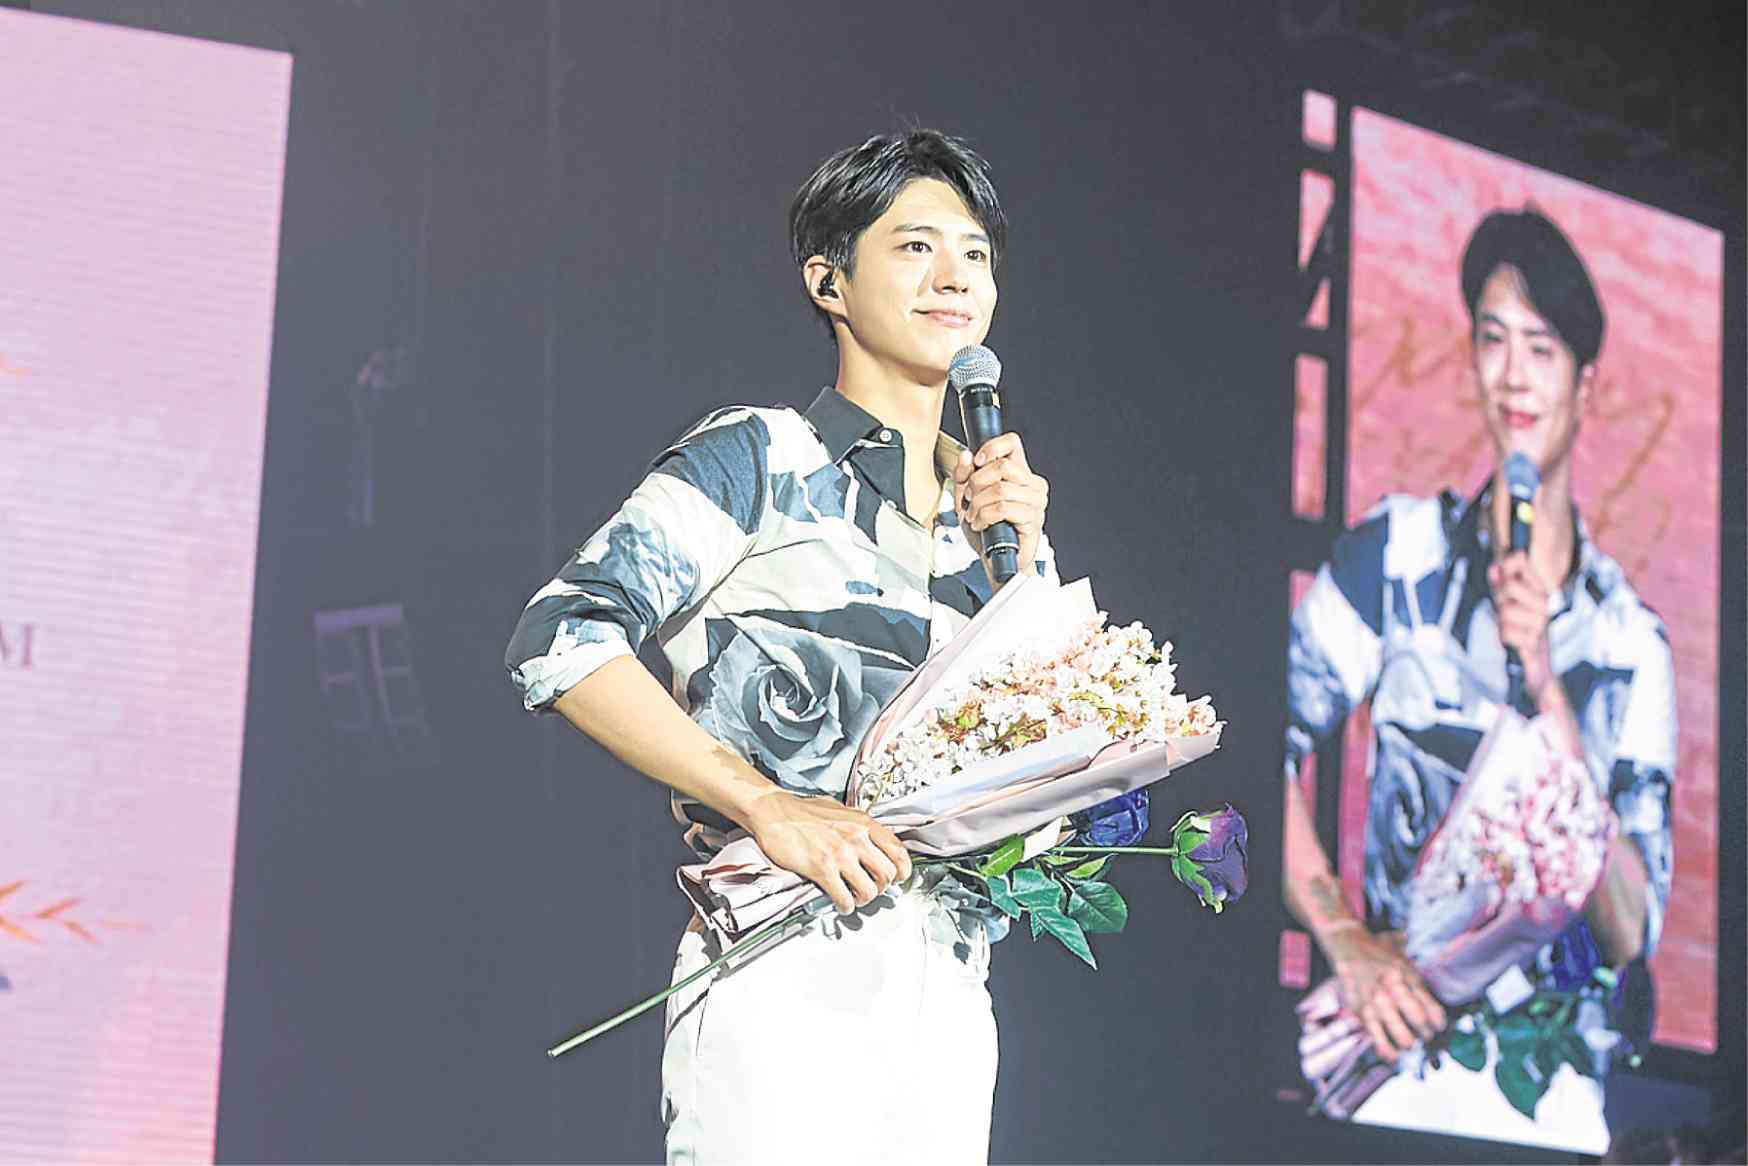 Park Bo Gum And Anne Curtis' Twitter Exchange